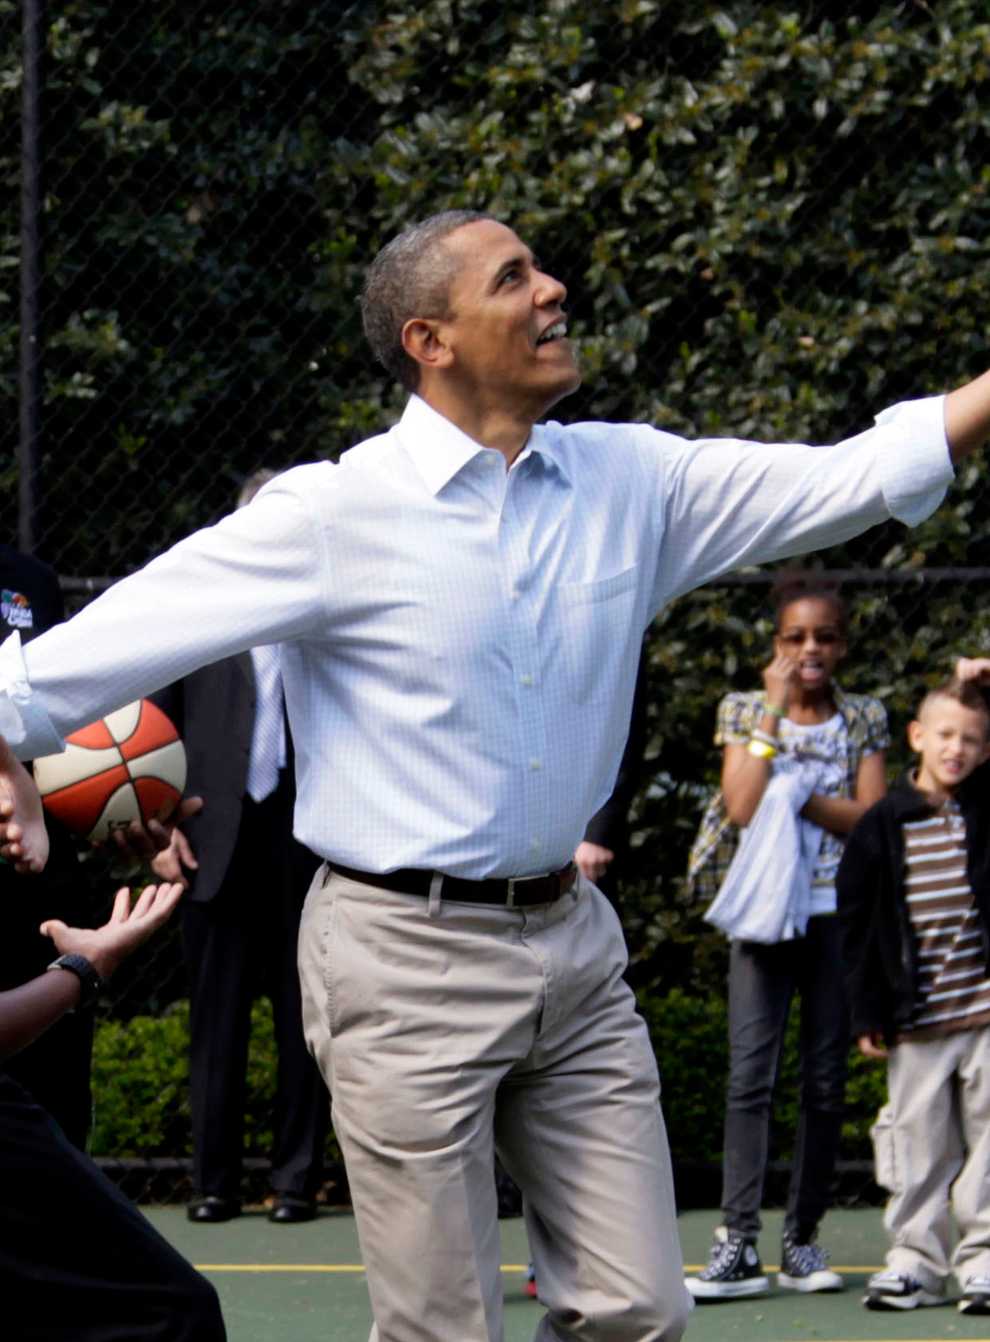 Barack Obama, front right, plays basketball with former NBA basketball player Bruce Bowen, front left, during the annual White House Easter Egg Roll at the White House in Washington in 2012 (Carolyn Kaster/AP)